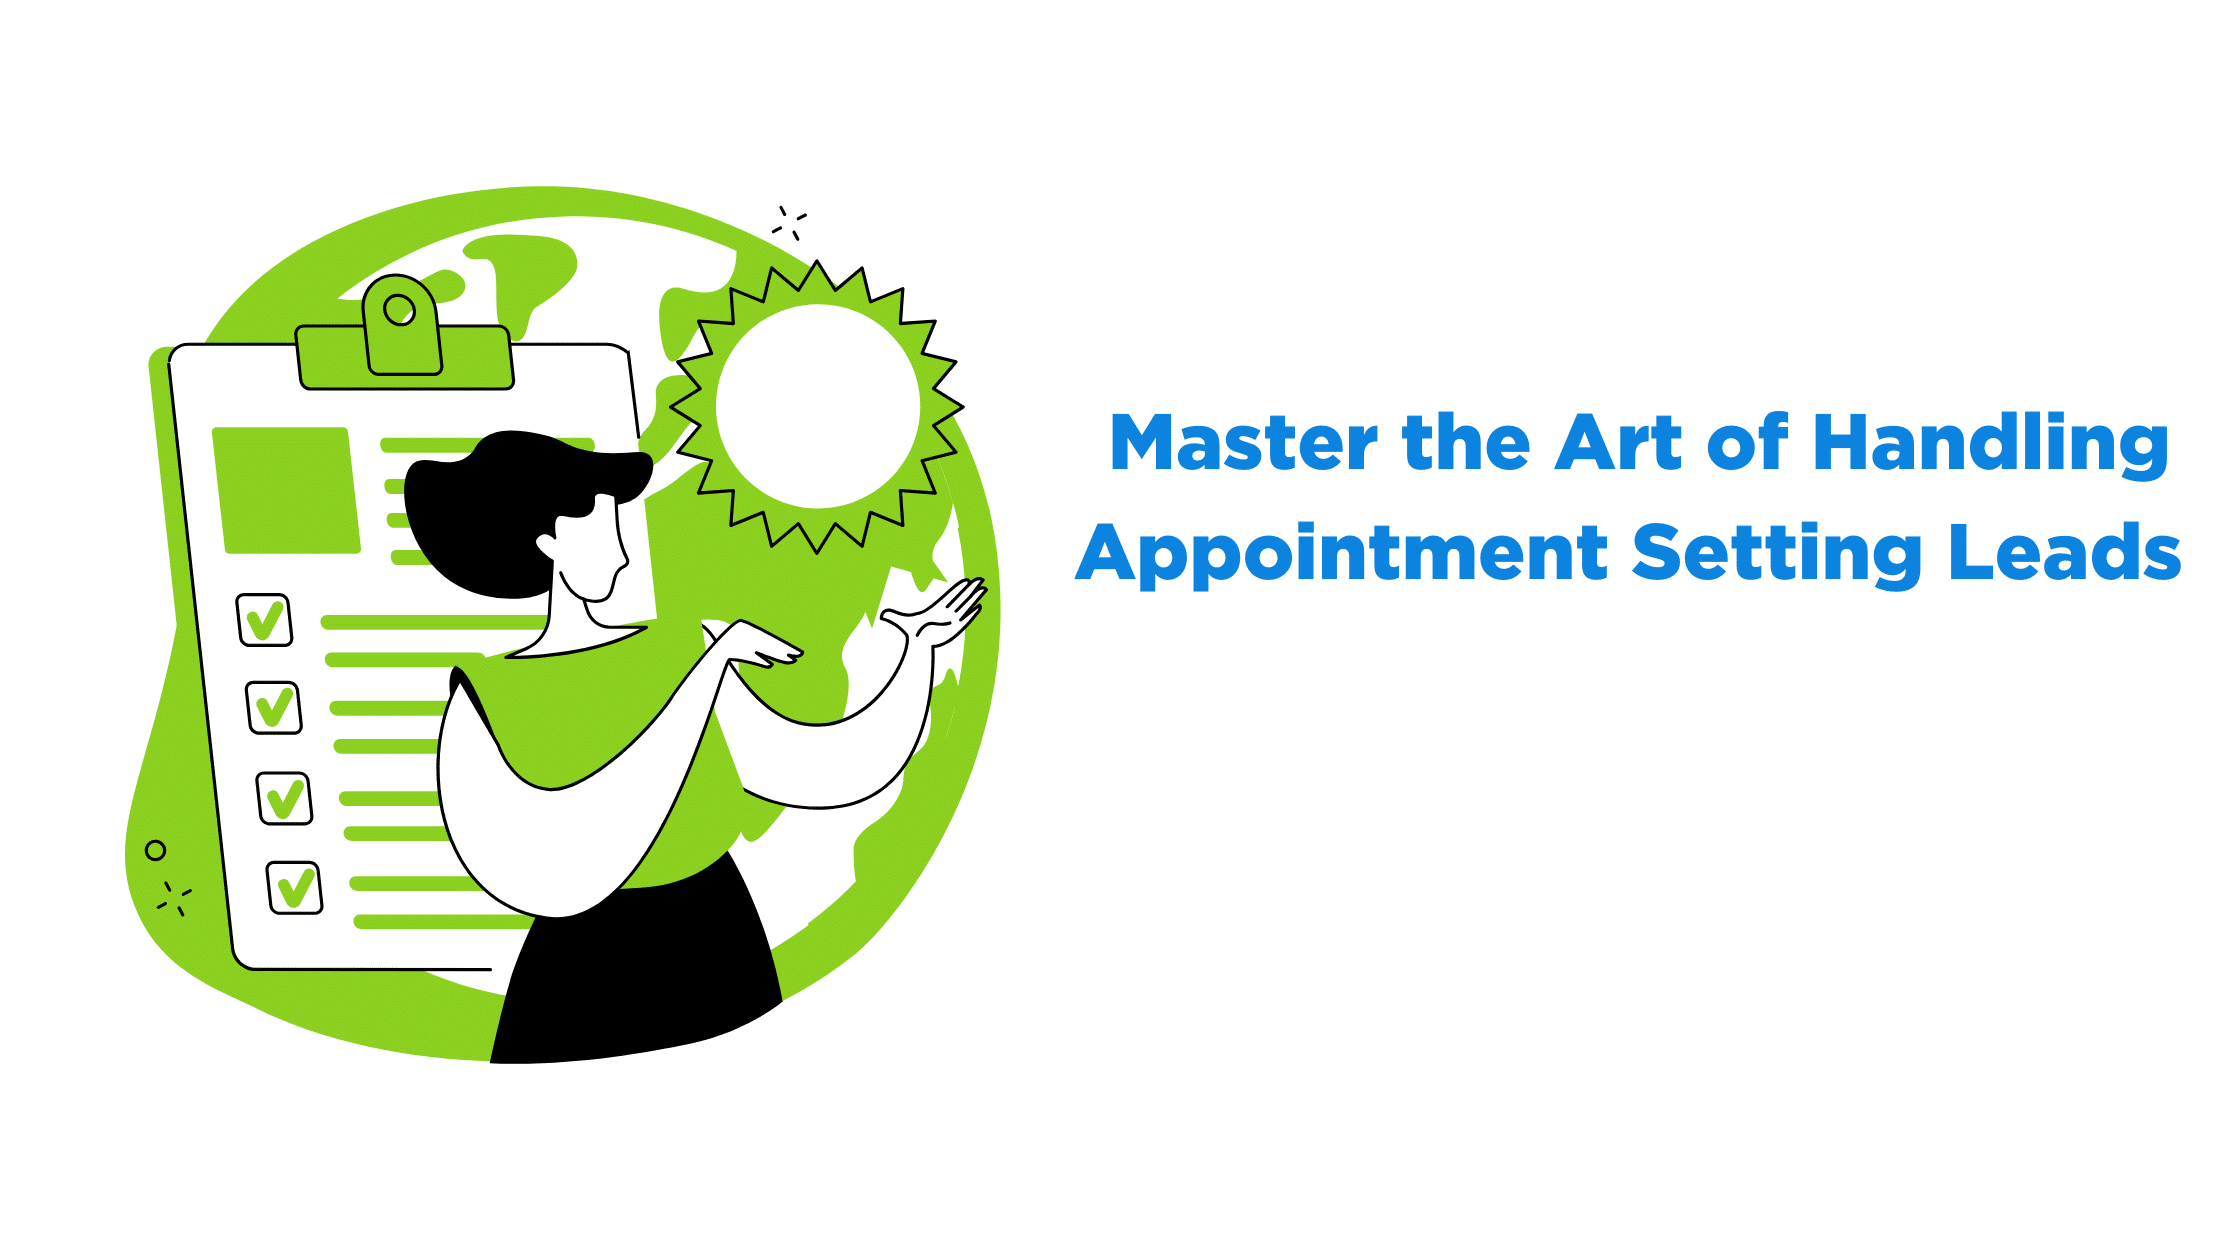 Master the Art of Handling Appointment Setting Leads